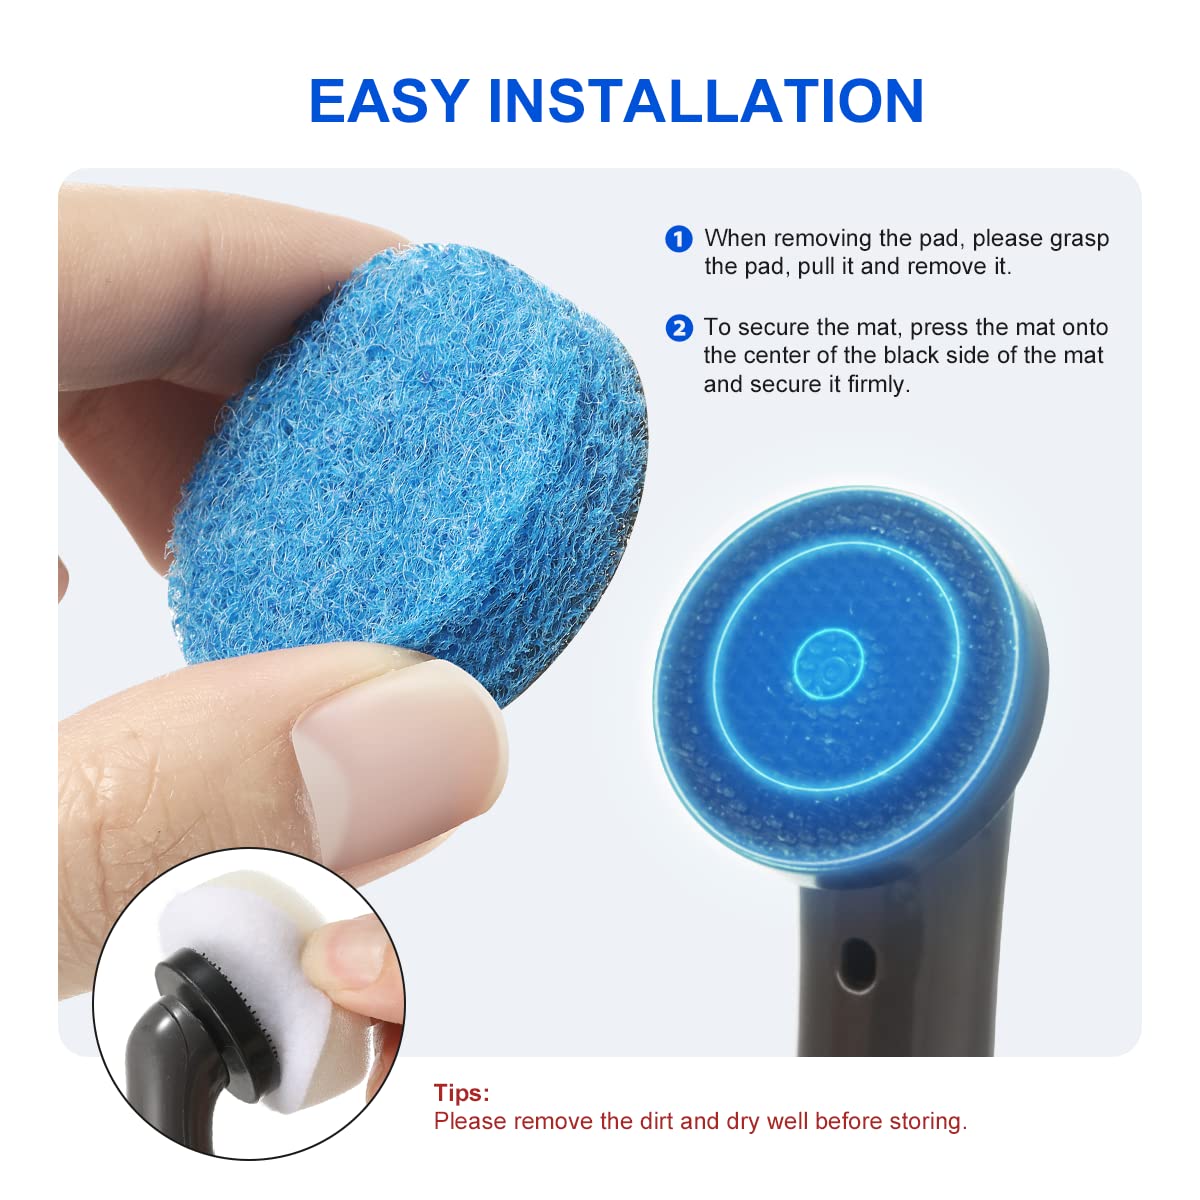 Easy installation:  When removing the pad, please grasp the pad, pull it and remove it. To secure the mat, press the mat onto the center of the black side of the mat and secure it firmly.